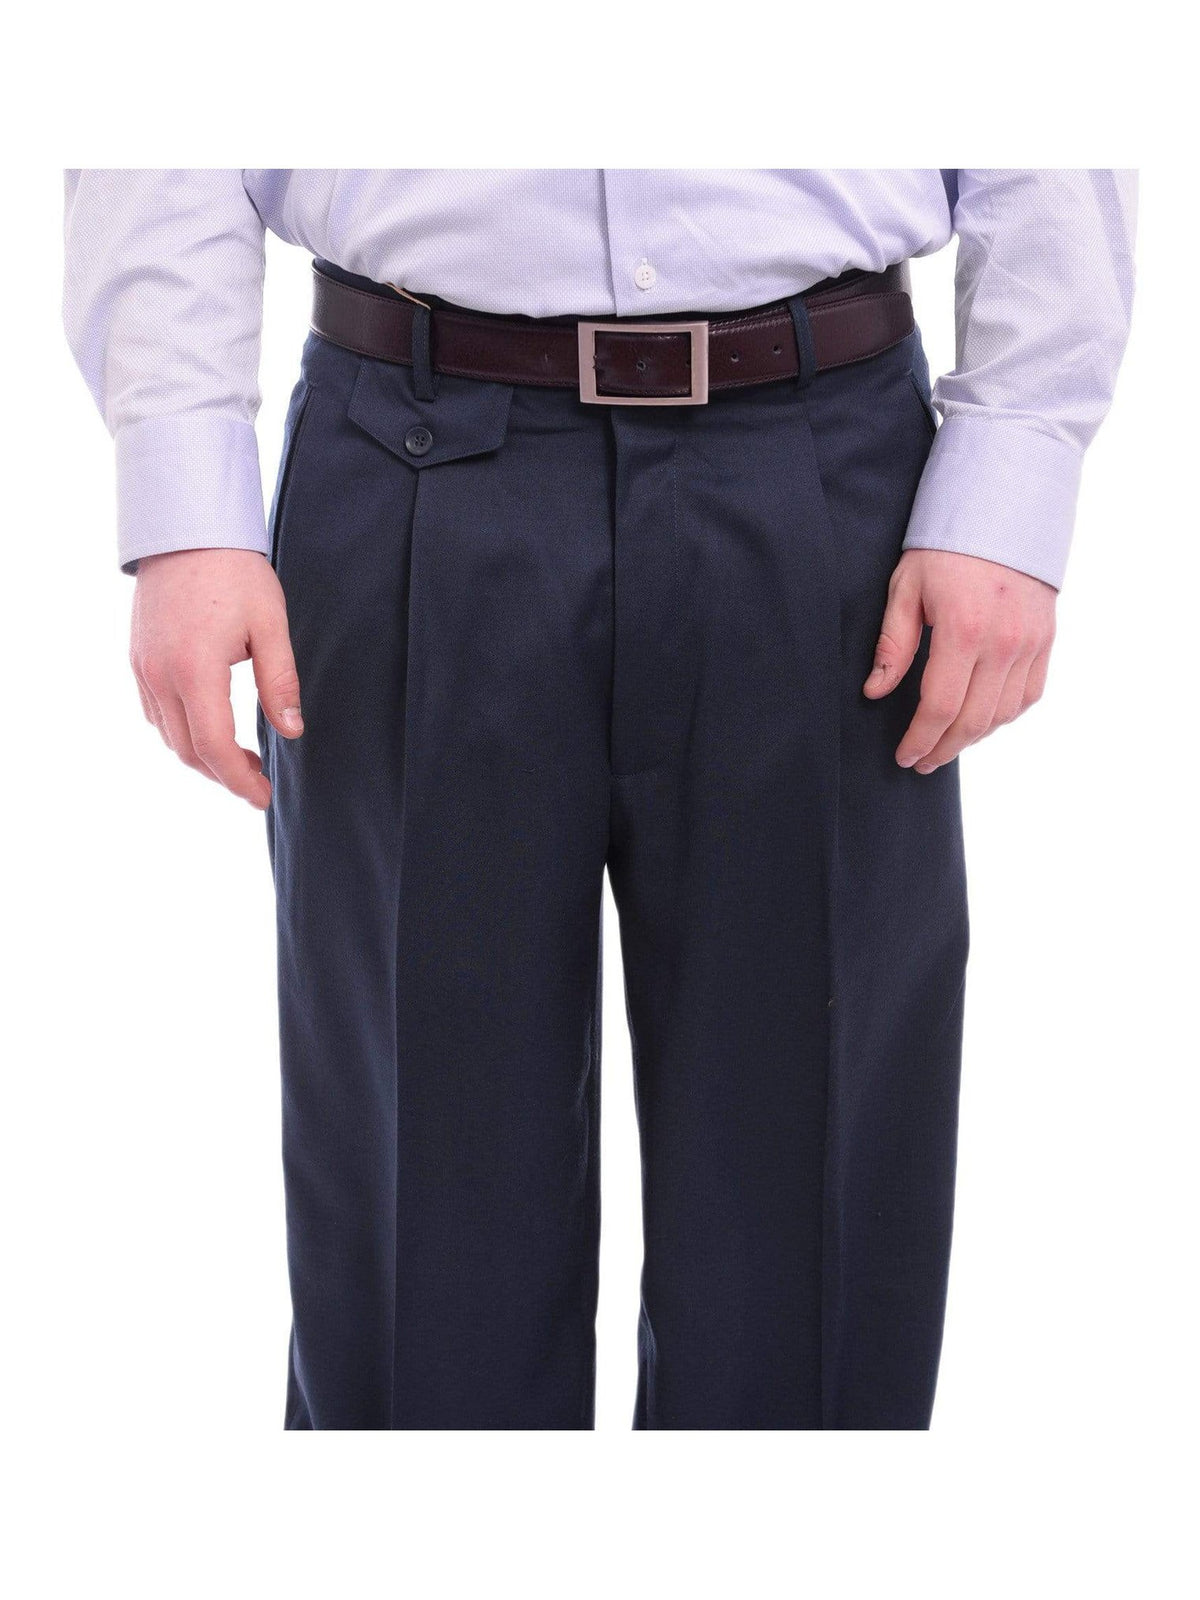 Apollo King PANTS Apollo King Classic Fit Wide Leg Solid Blue-green Pleated Wool Dress Pants